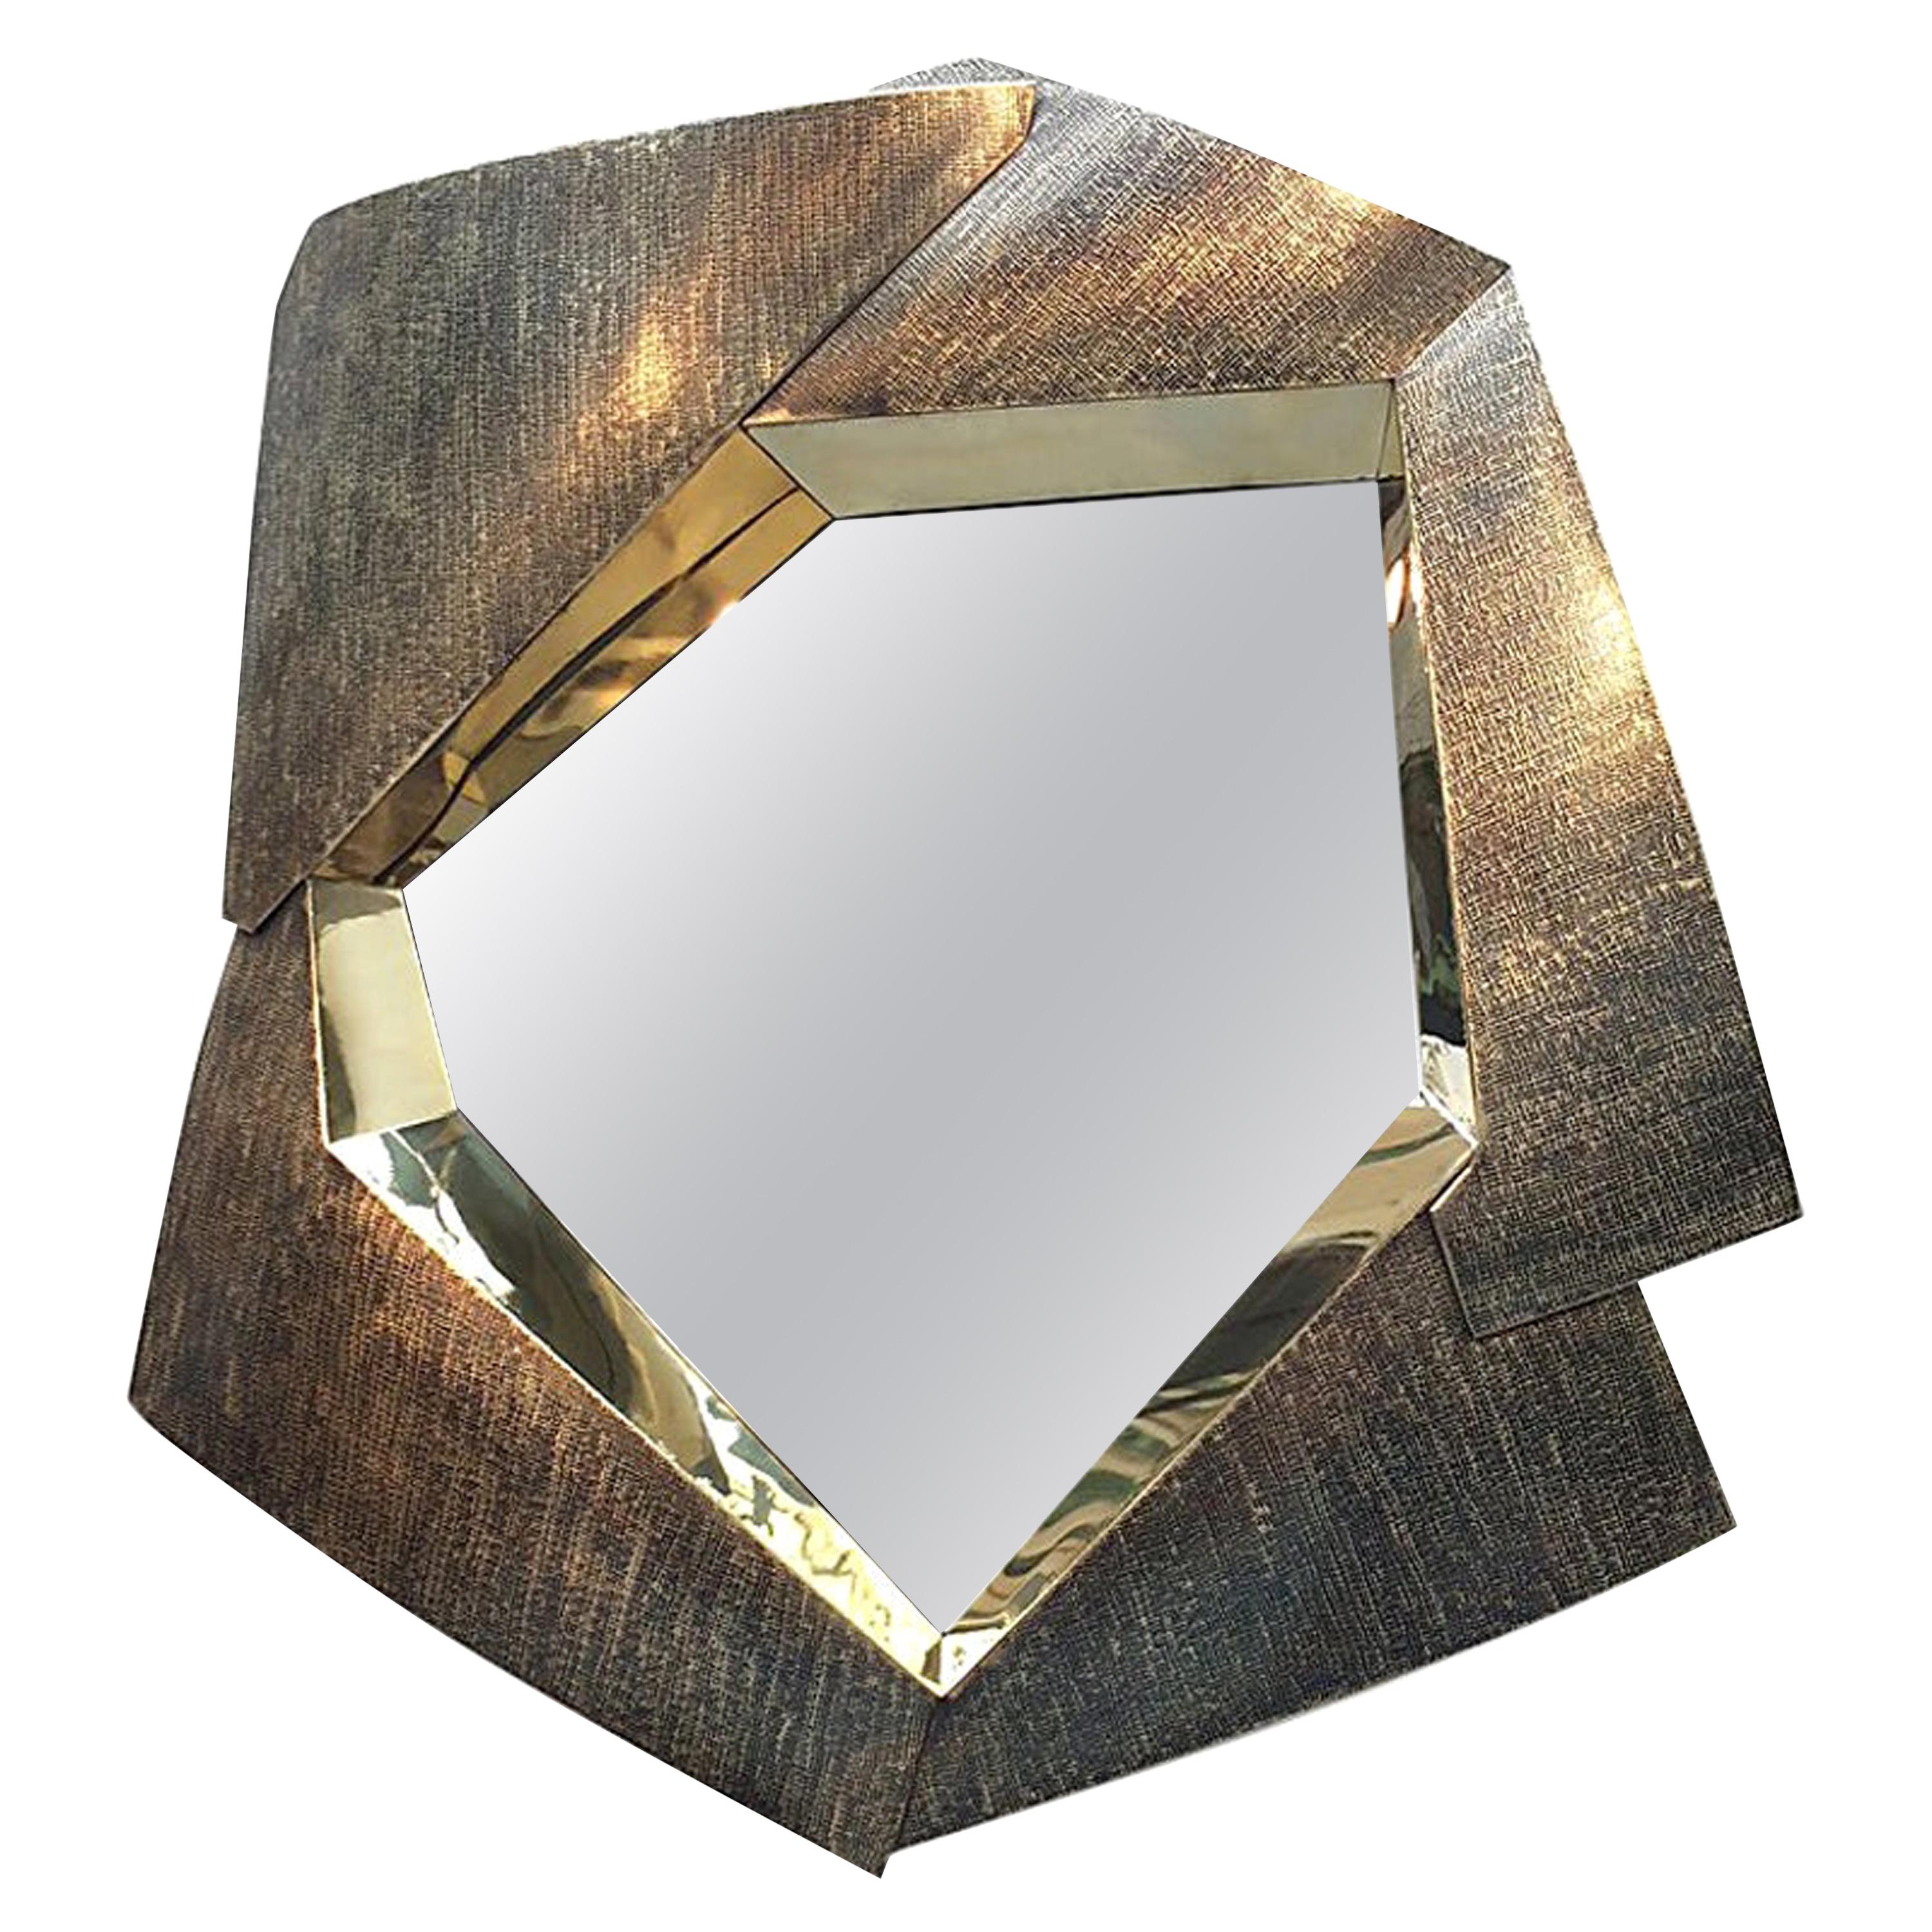 Impressive Large One of a Kind Brass Mirror, France